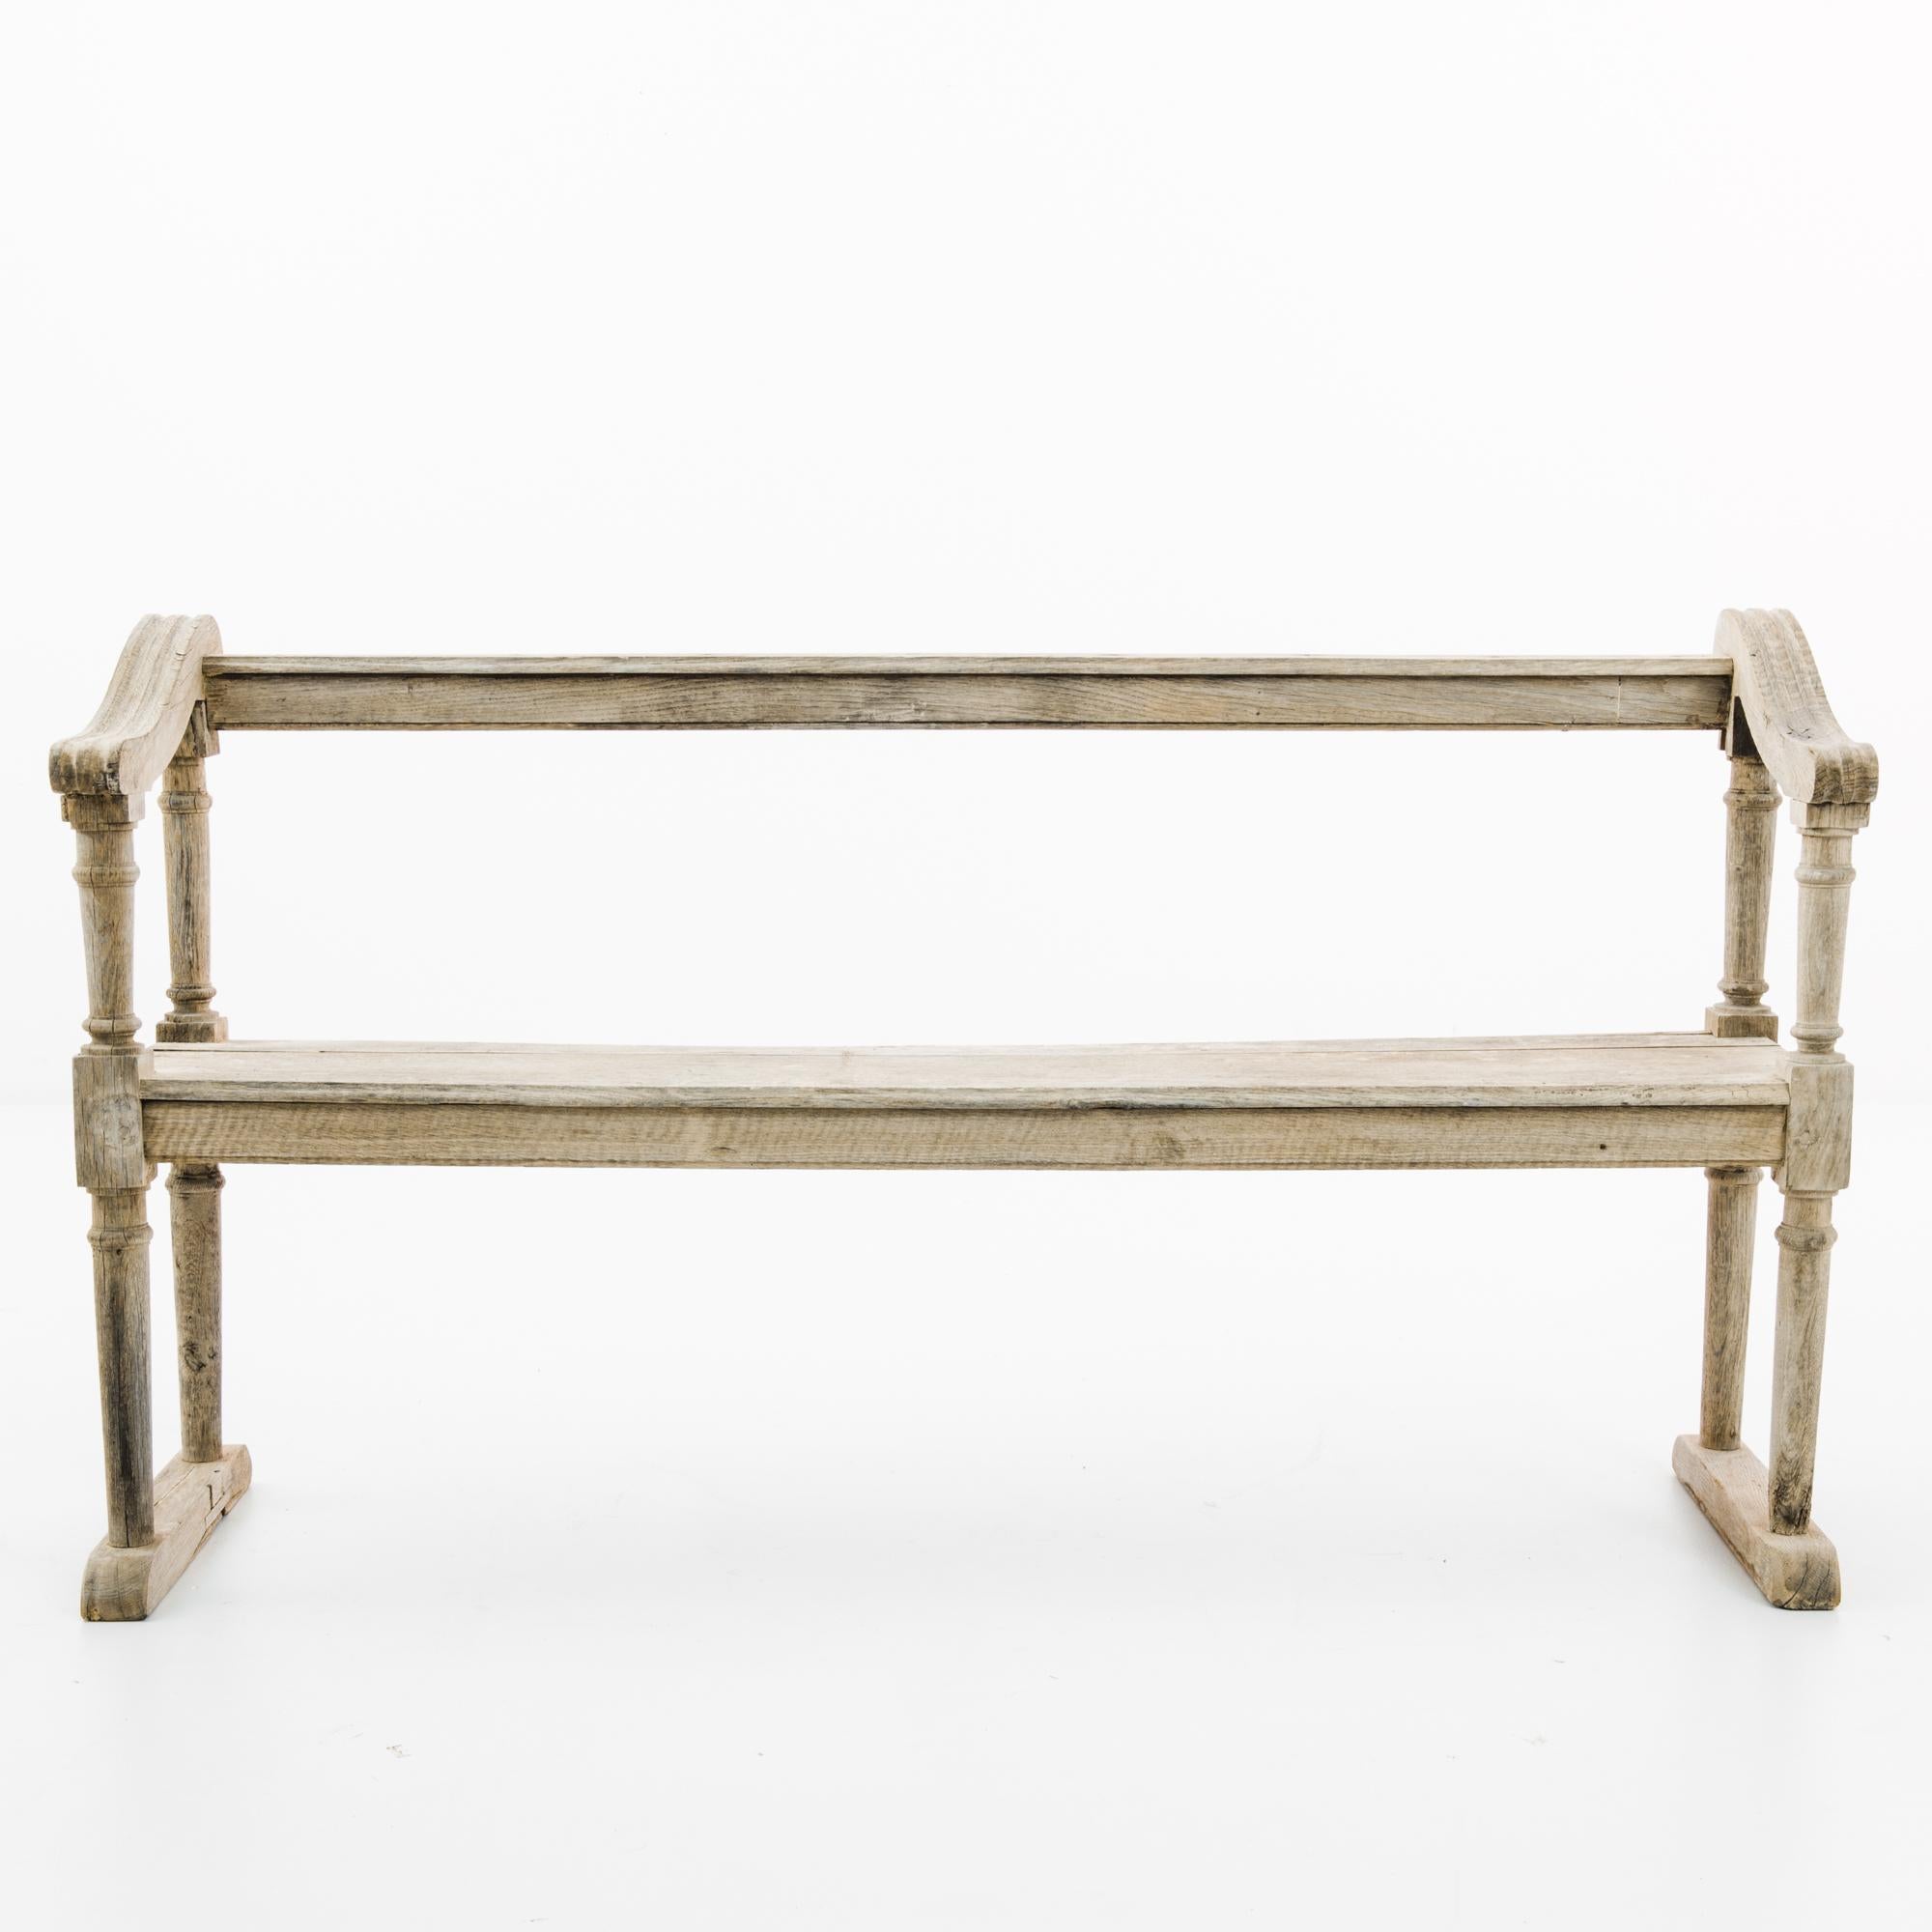 An oak bench from France, circa 1880. An upright pew-like frame, the sinuous slope of the armrests lends an graceful inflection. The wood has been restored to a natural finish, revealing the fine grain and subtle blush tones of the oak. The use of